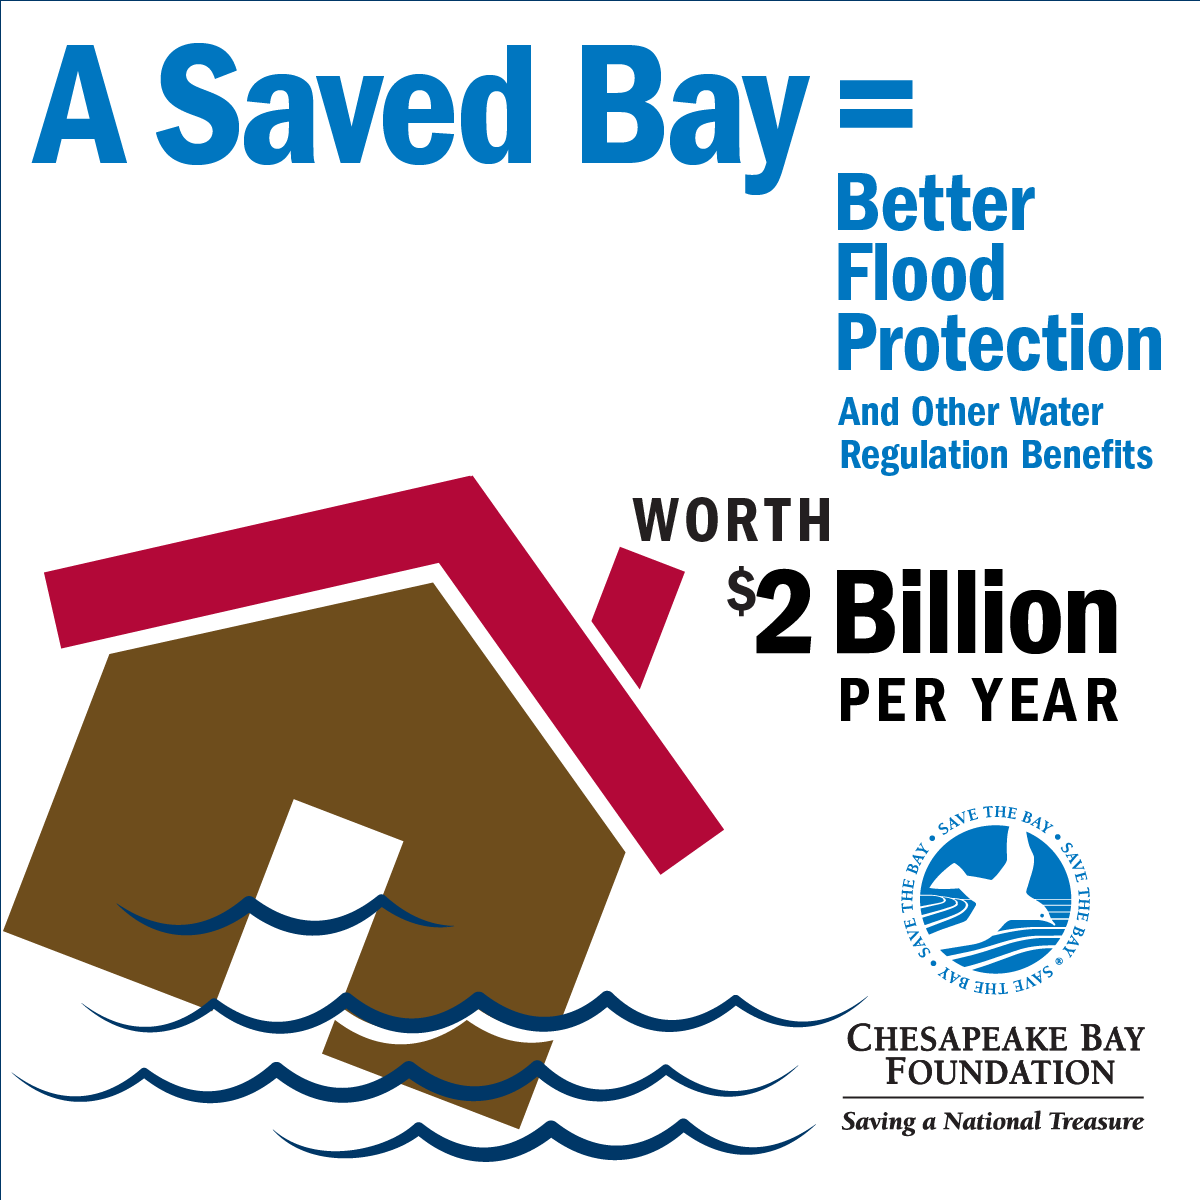 A Saved Bay = Better Flood Protection worth $2 Billion per year